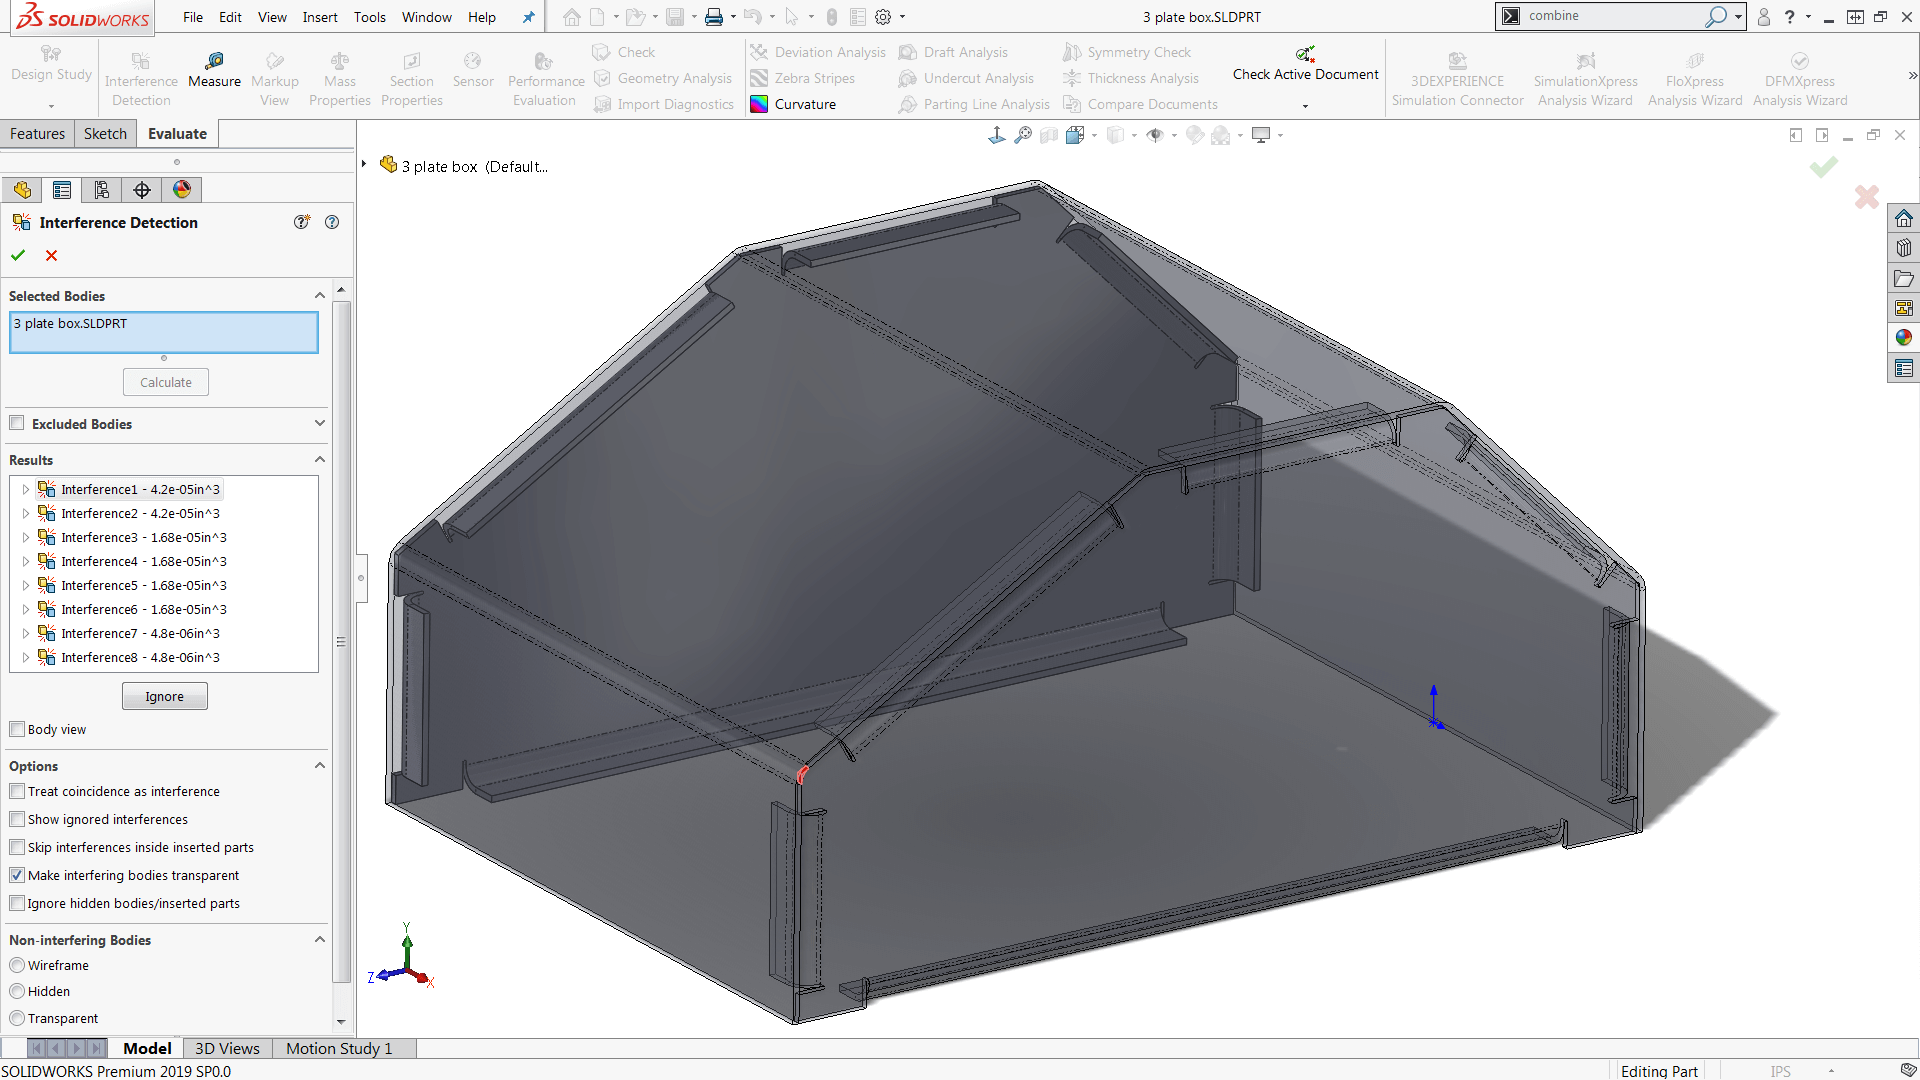 Exploring Interference Detection with Multi-Body Parts in SOLIDWORKS